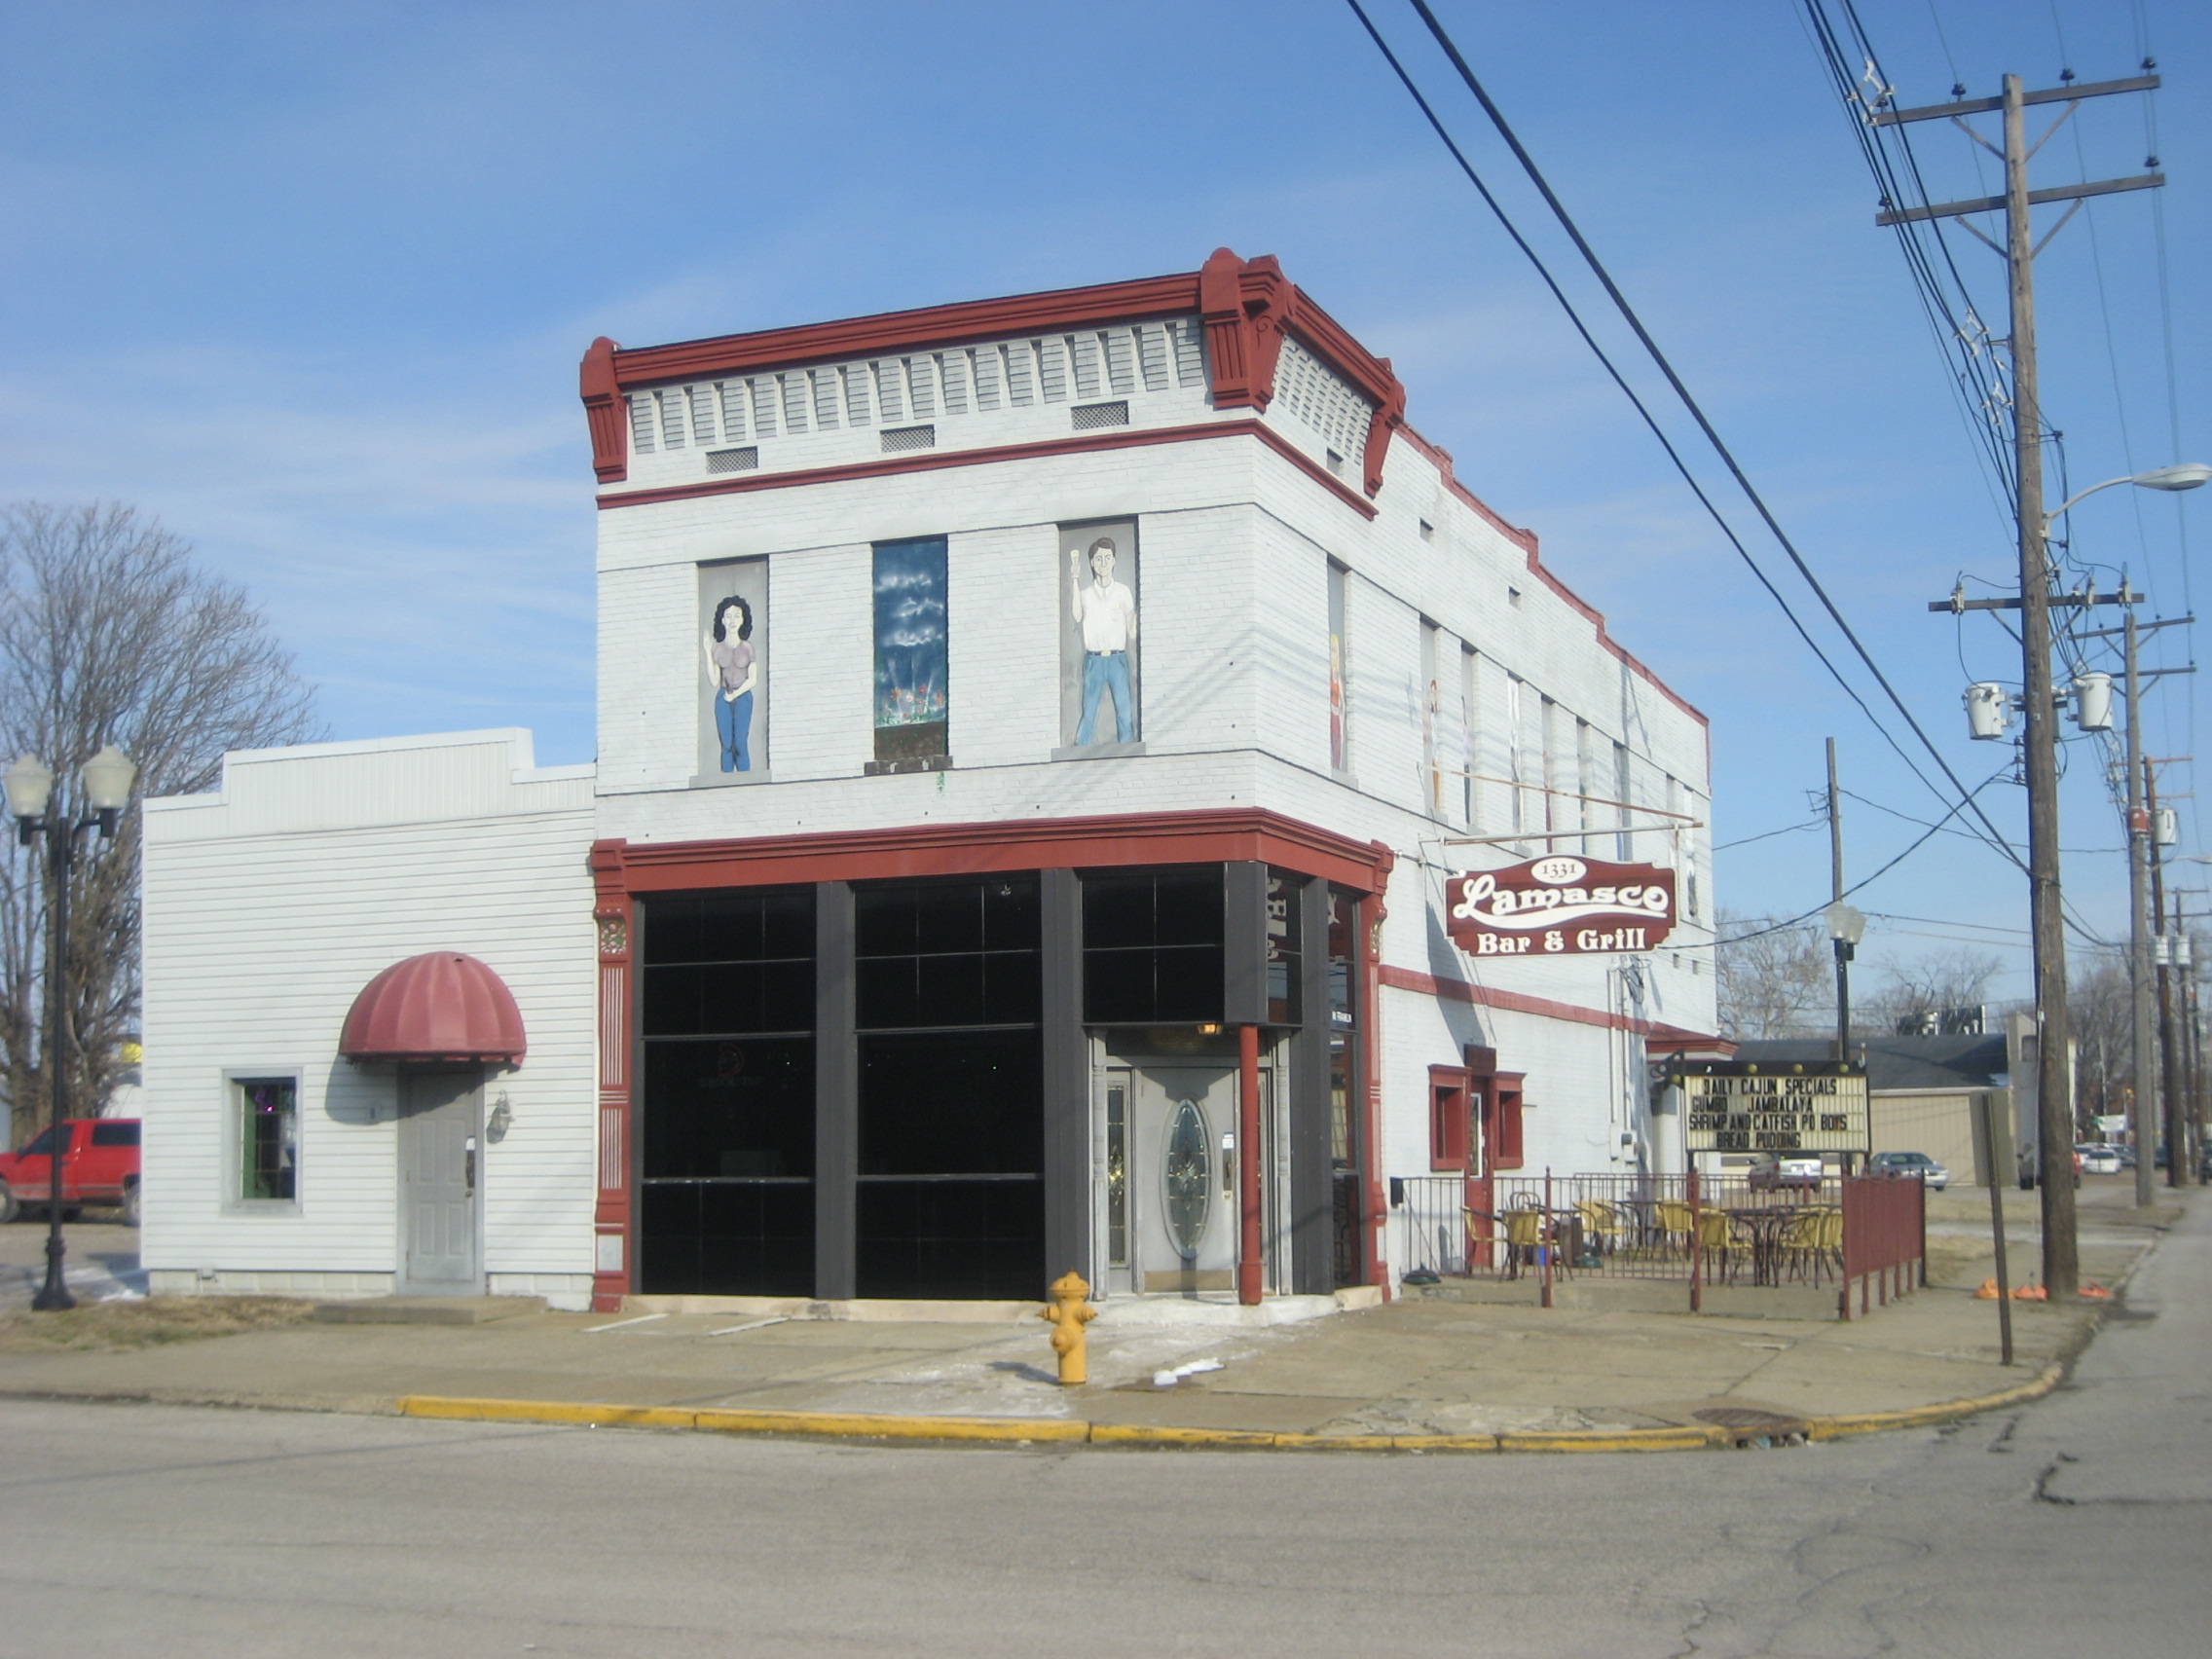 Detroy Grocery